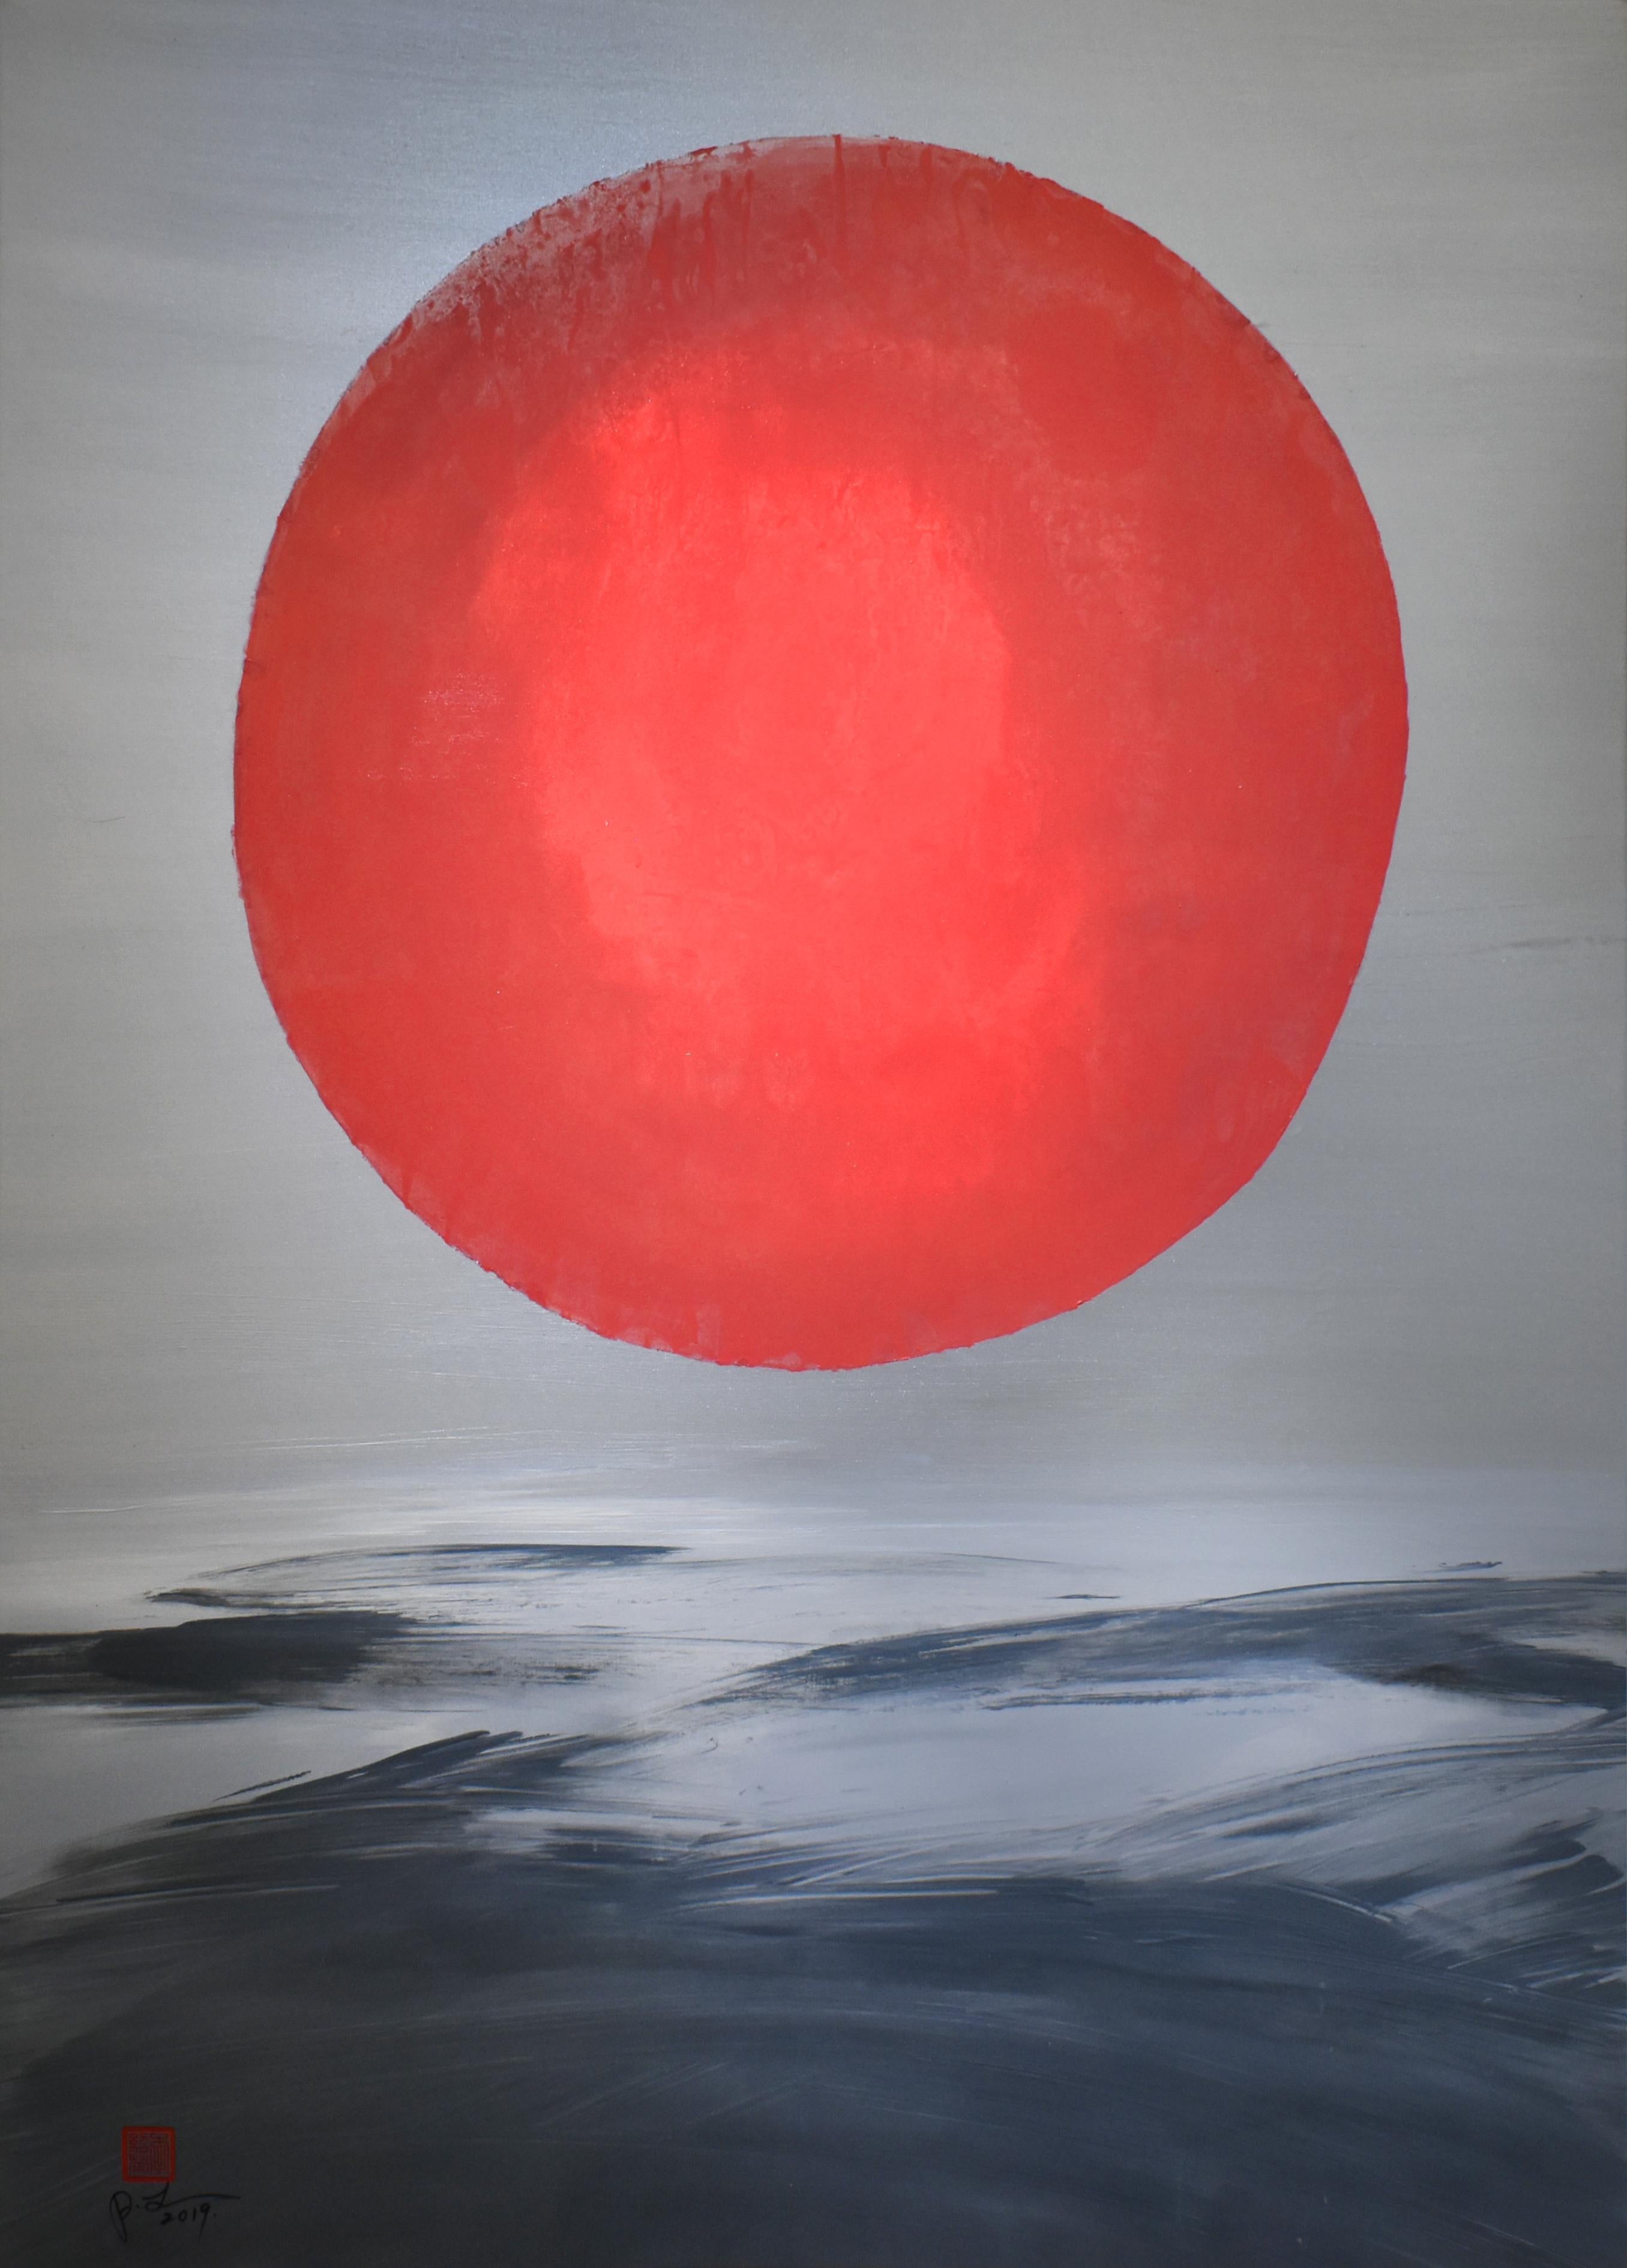 Patrick Lee Abstract Painting - Mysterious Red Planet Rises In The Sky Expresses Taoism Less Is More Spirit 